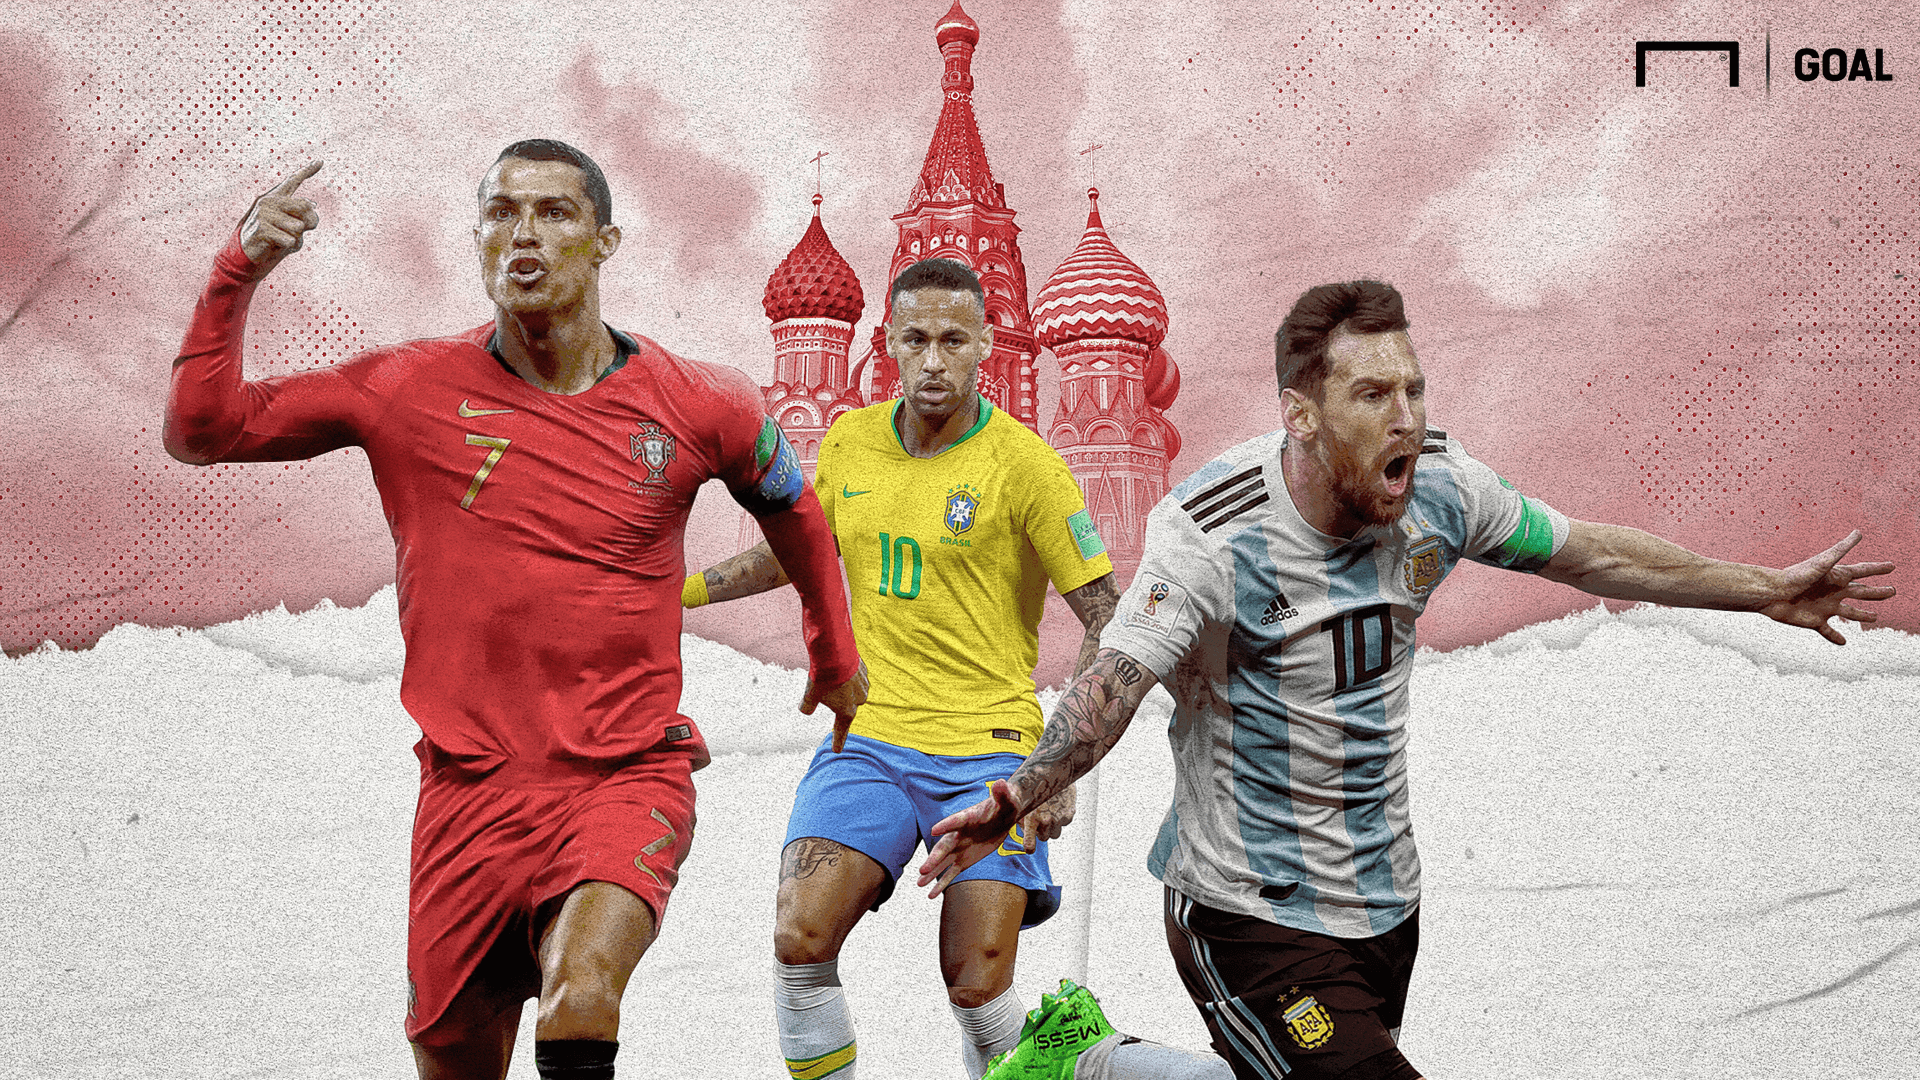 Ronaldo and Messi don't need to dominate the World Cup to dominate